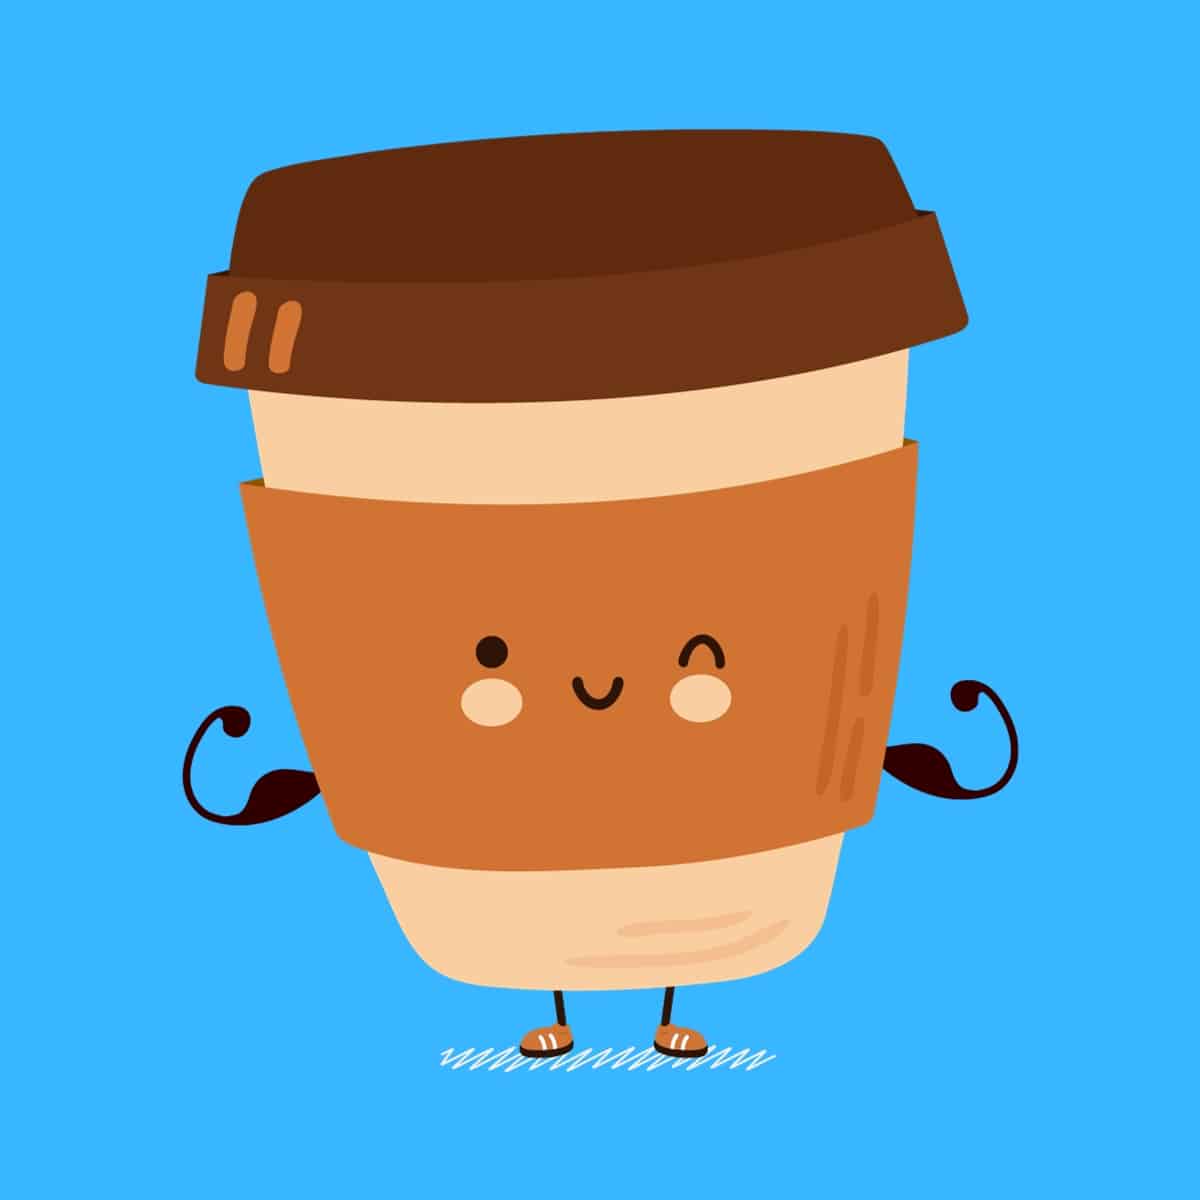 Cartoon graphic of coffee cup showing muscles on blue background.